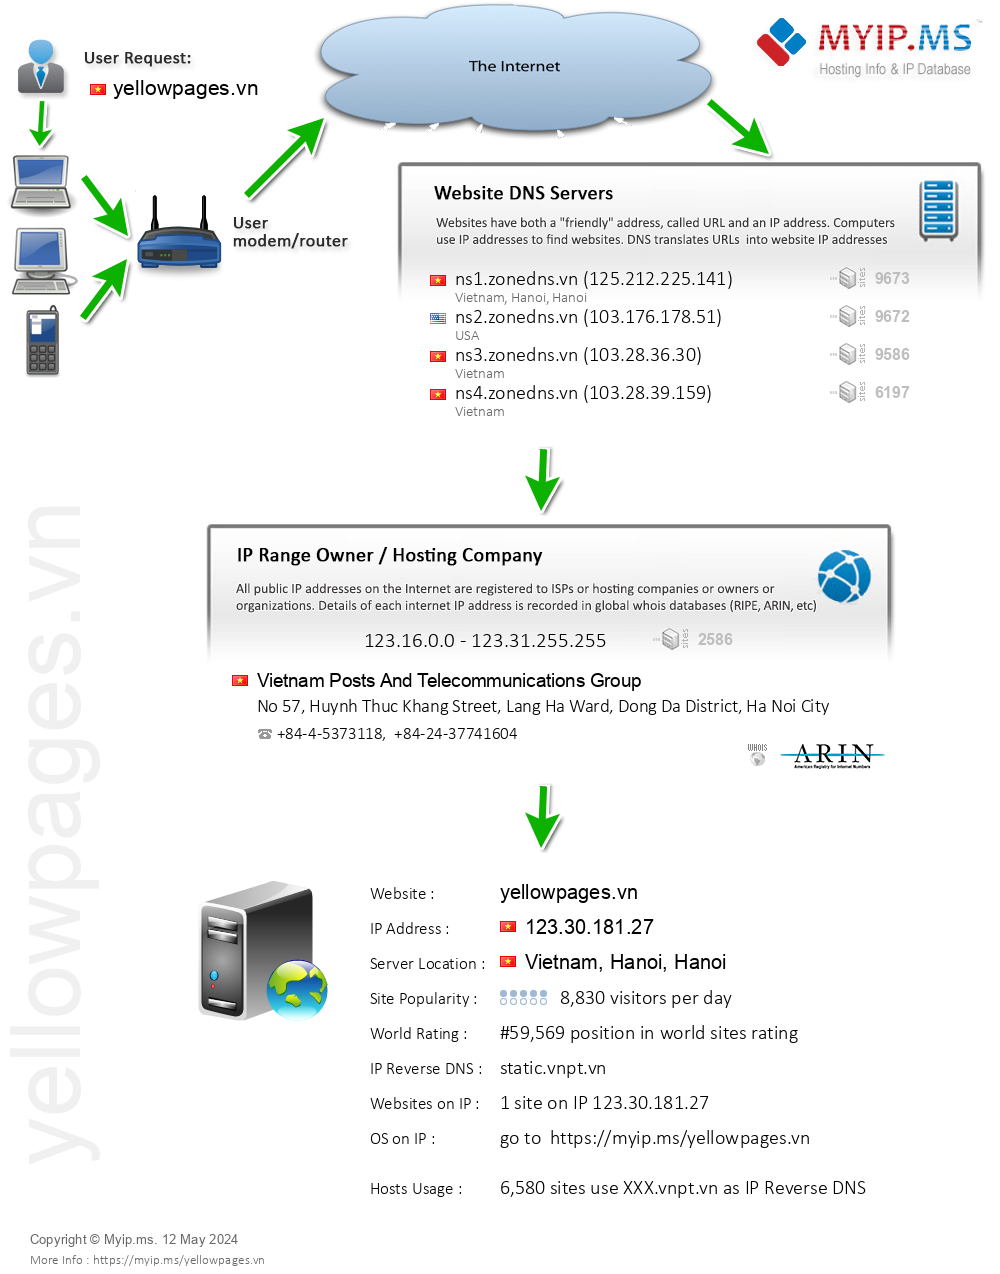 Yellowpages.vn - Website Hosting Visual IP Diagram